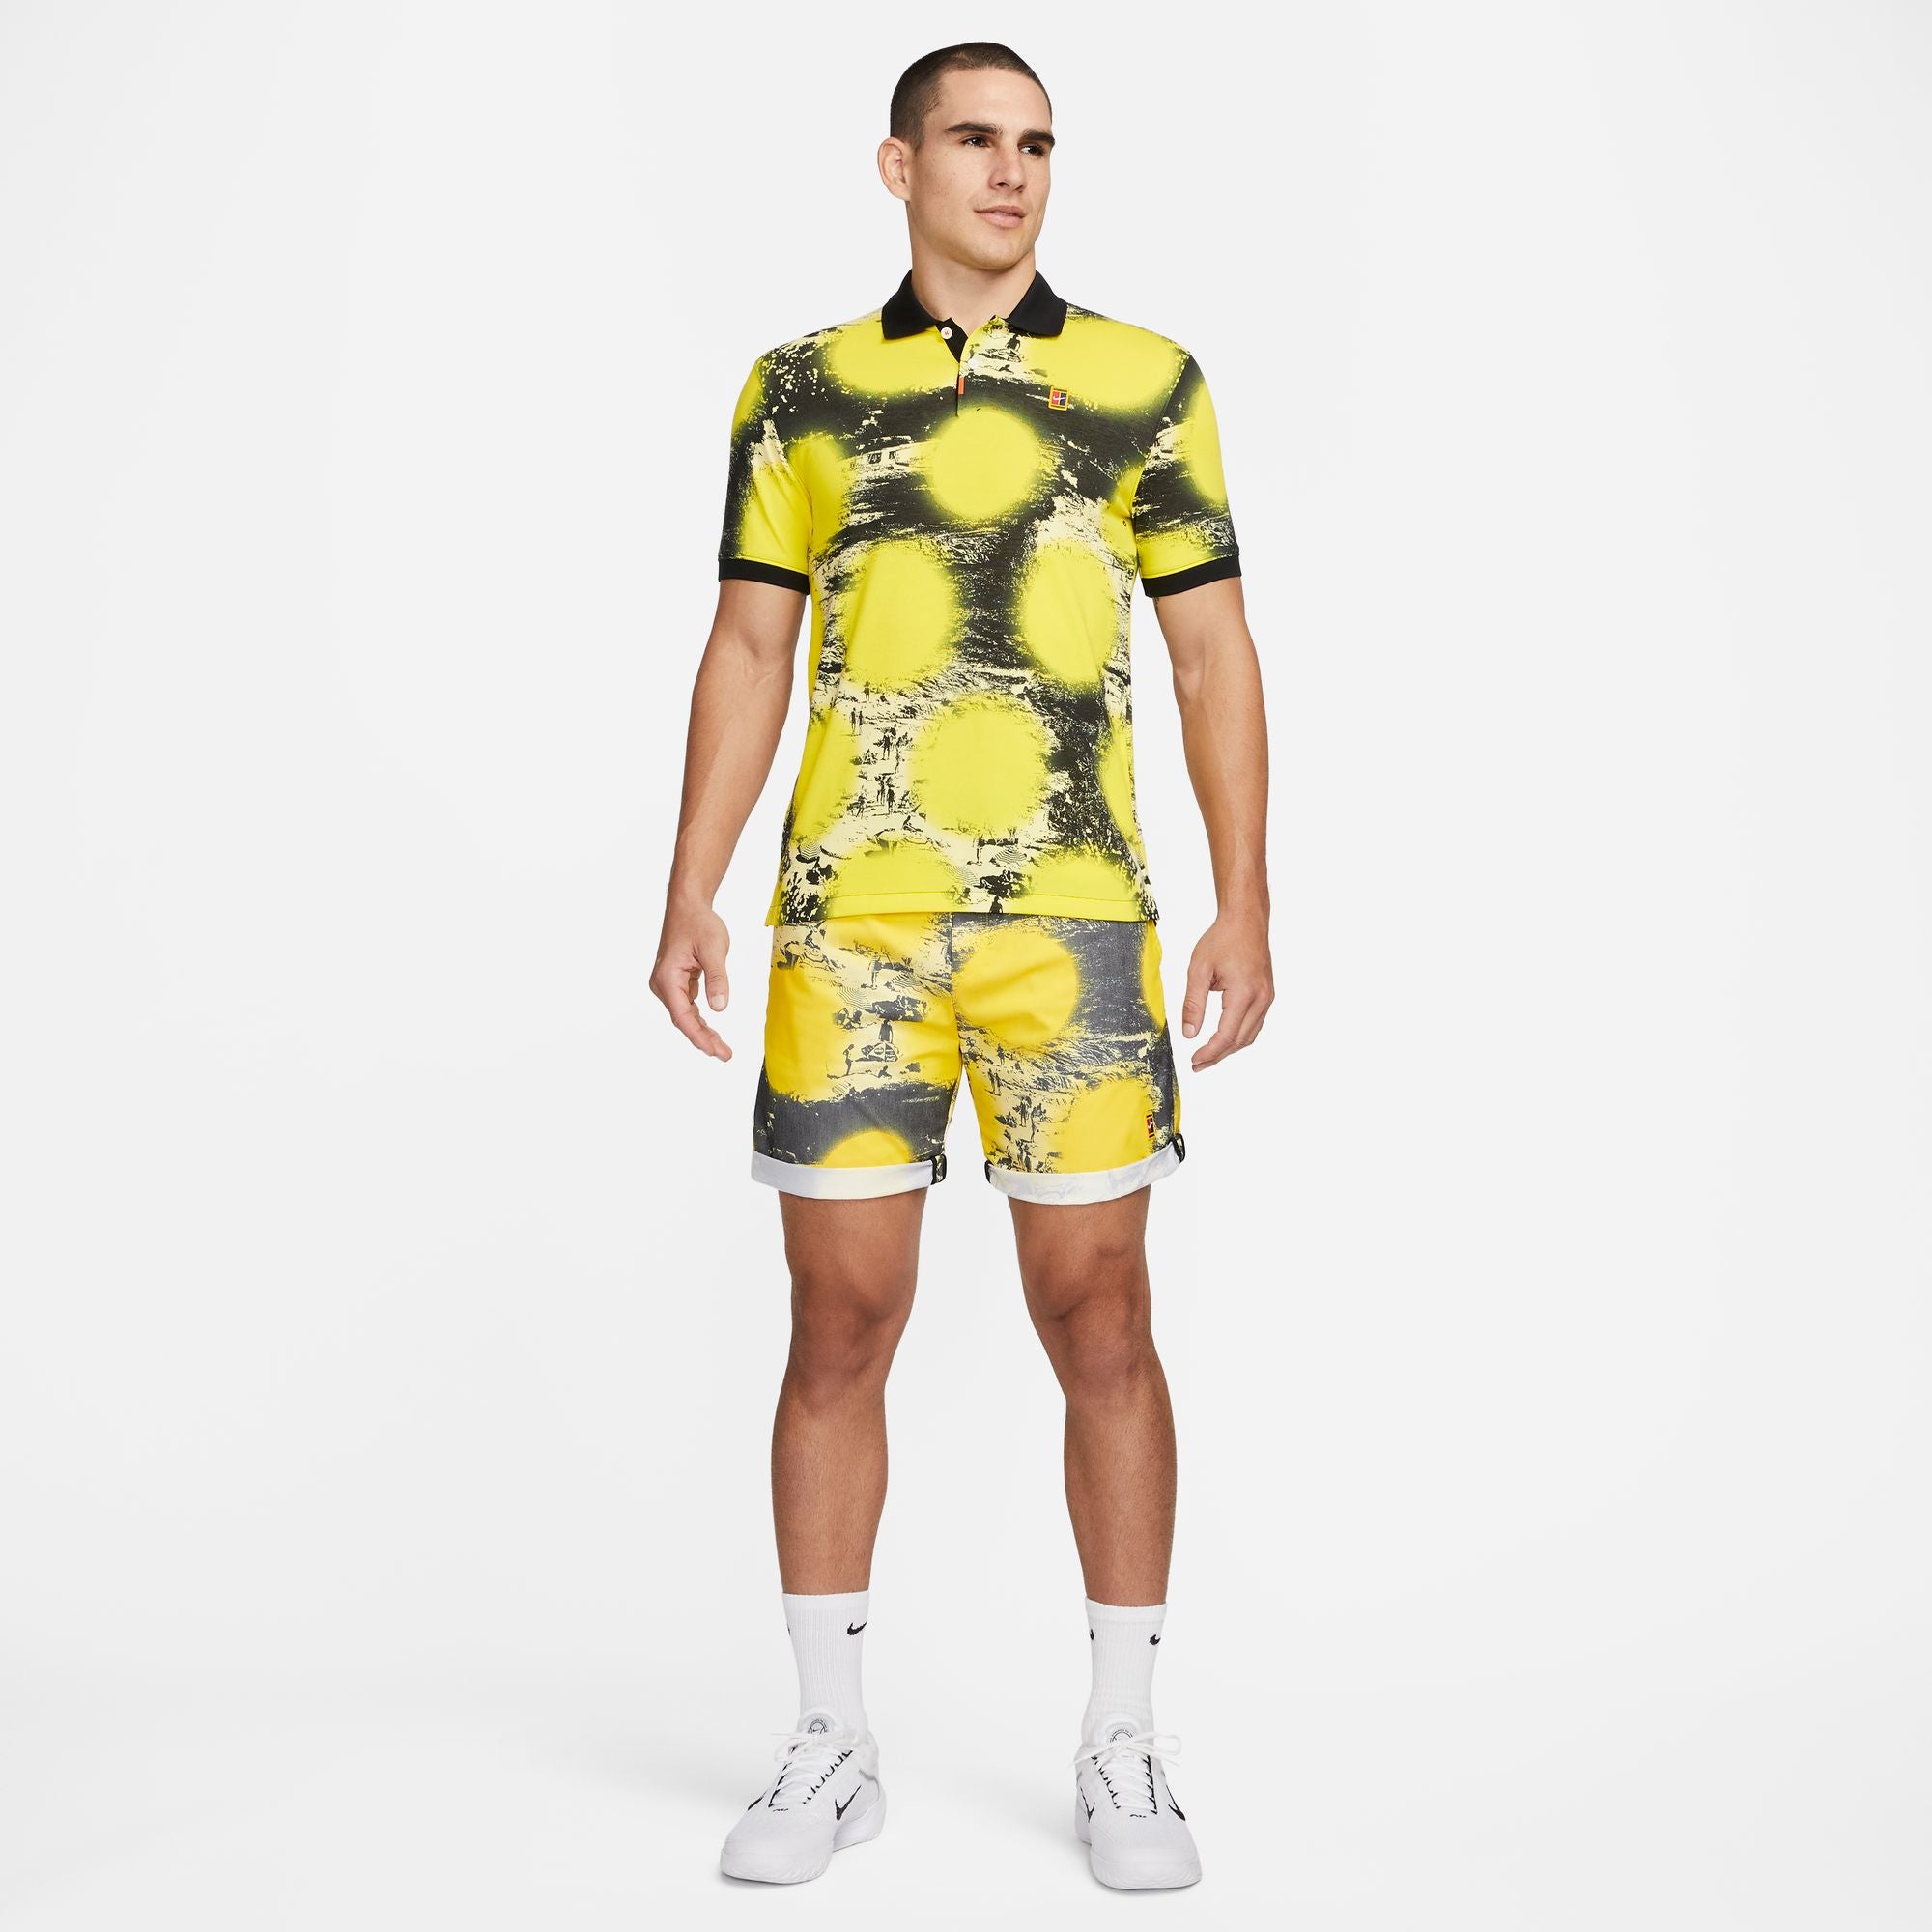 The Nike Men's Polo Printed Slim-Fit Polo